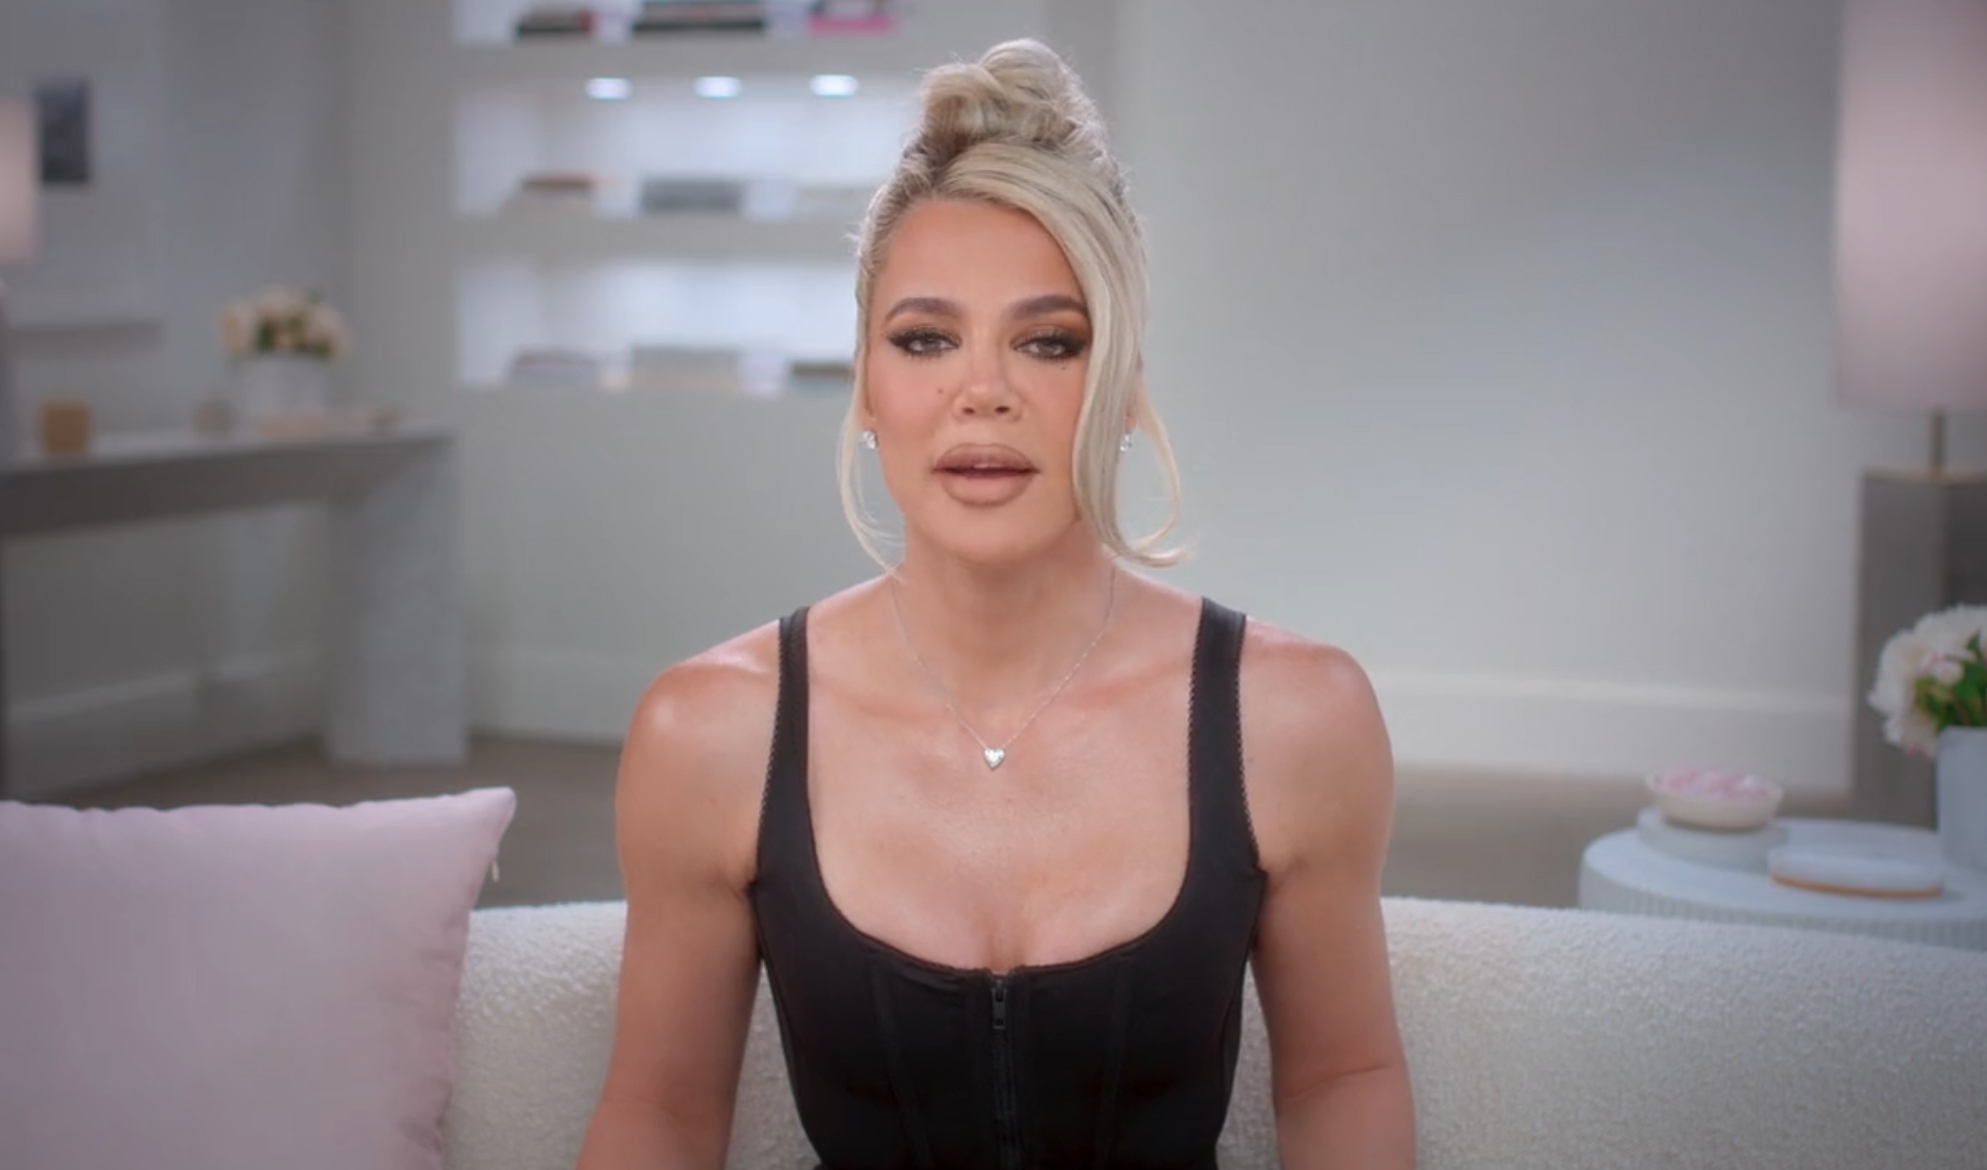 Fans think Khloe Kardashian has gotten her lips and chin done